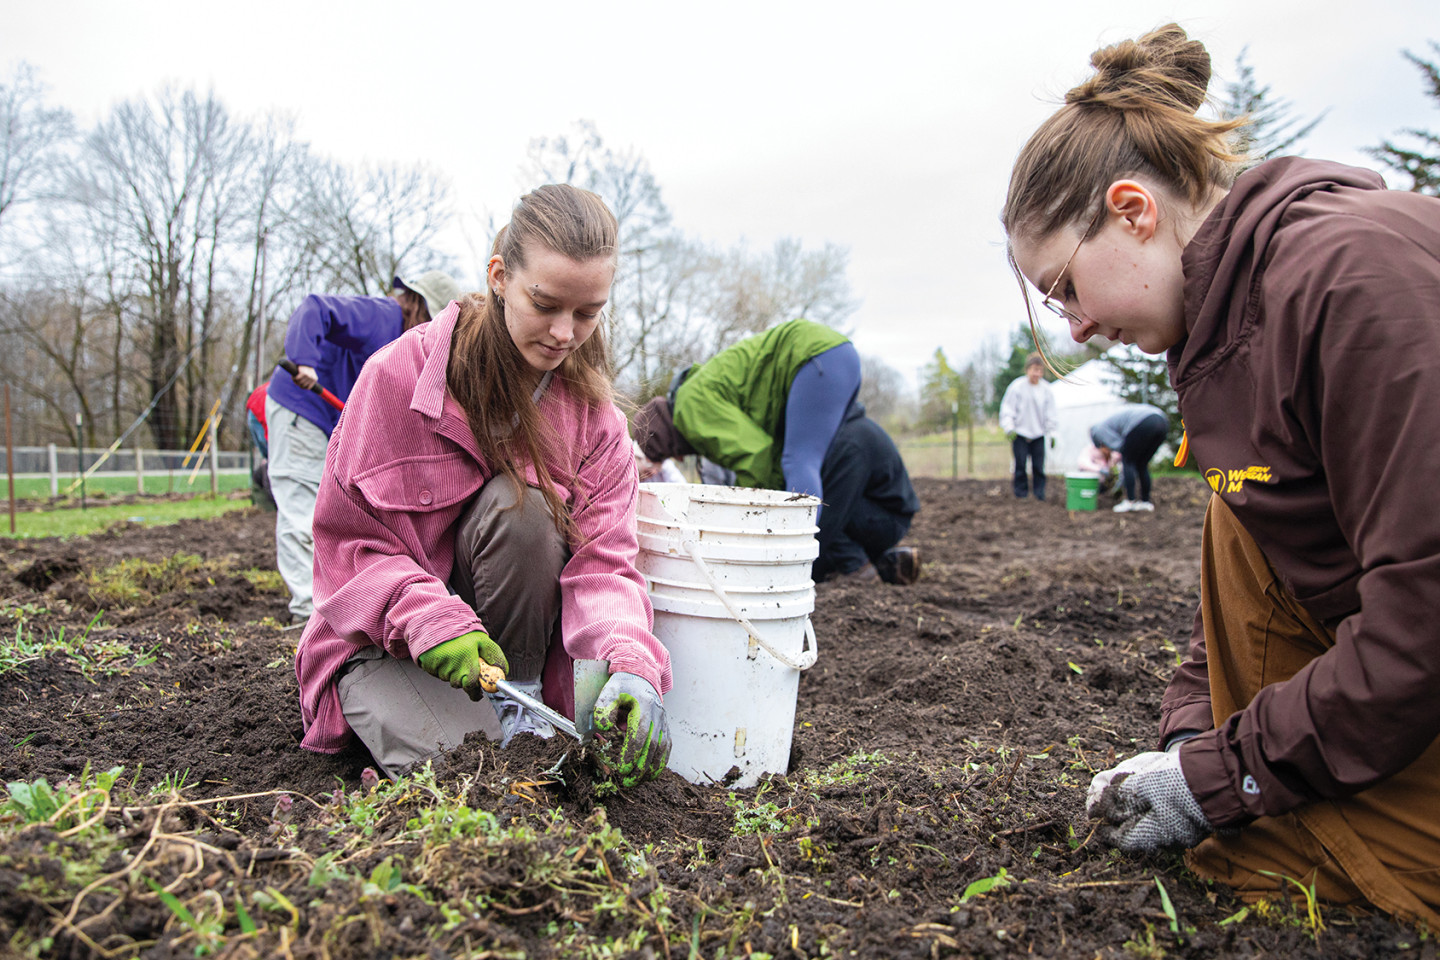 From March through December, students practice regenerative agricultural techniques at Western’s Gibbs House Sustainability Research and Demonstration Site.